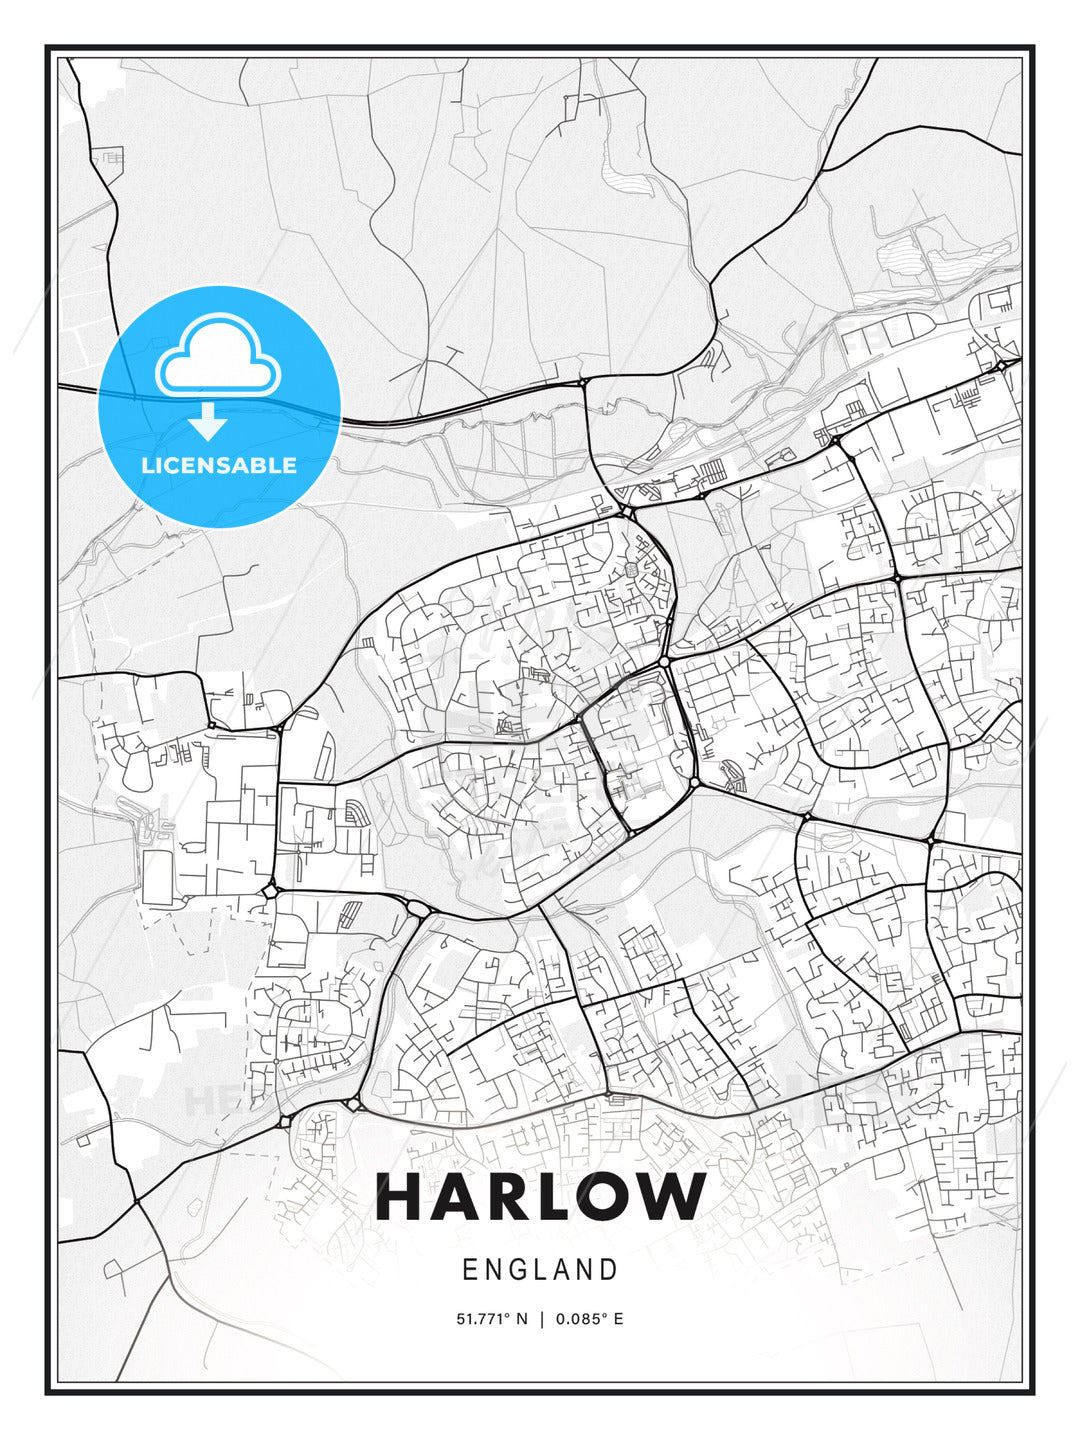 Harlow, England, Modern Print Template in Various Formats - HEBSTREITS Sketches